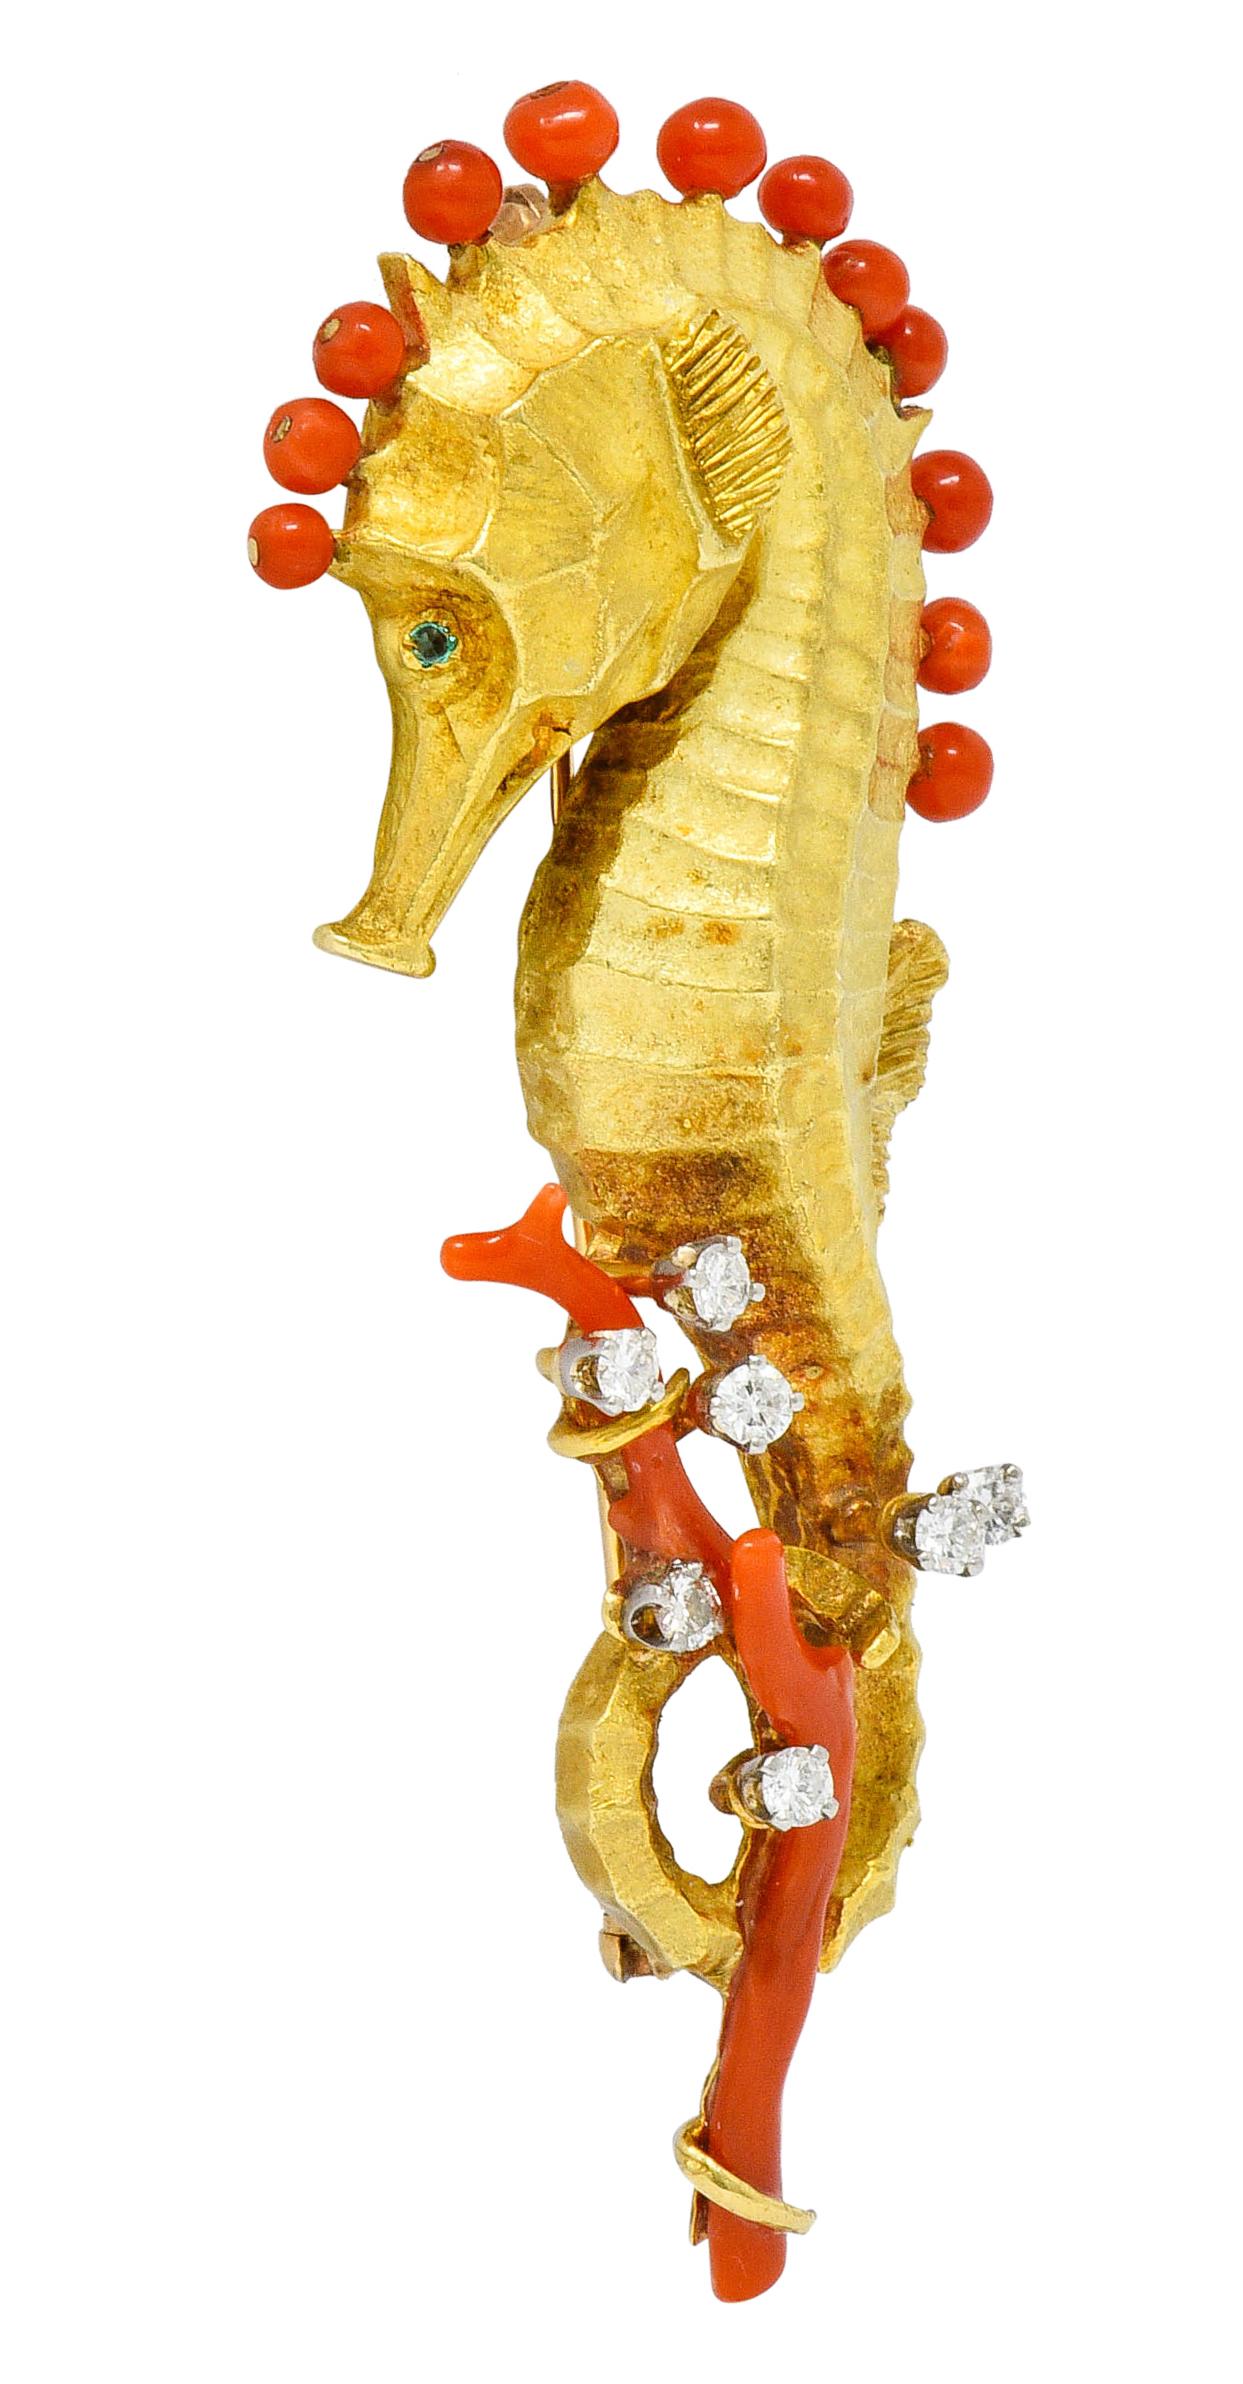 Brooch is designed as a highly rendered matte gold seahorse

With 2.5 to 3.5 mm round bead coral along spine and two branches of coral intertwined with tail

Coral is a very well-matched orangey-red color and is in very good condition

With round